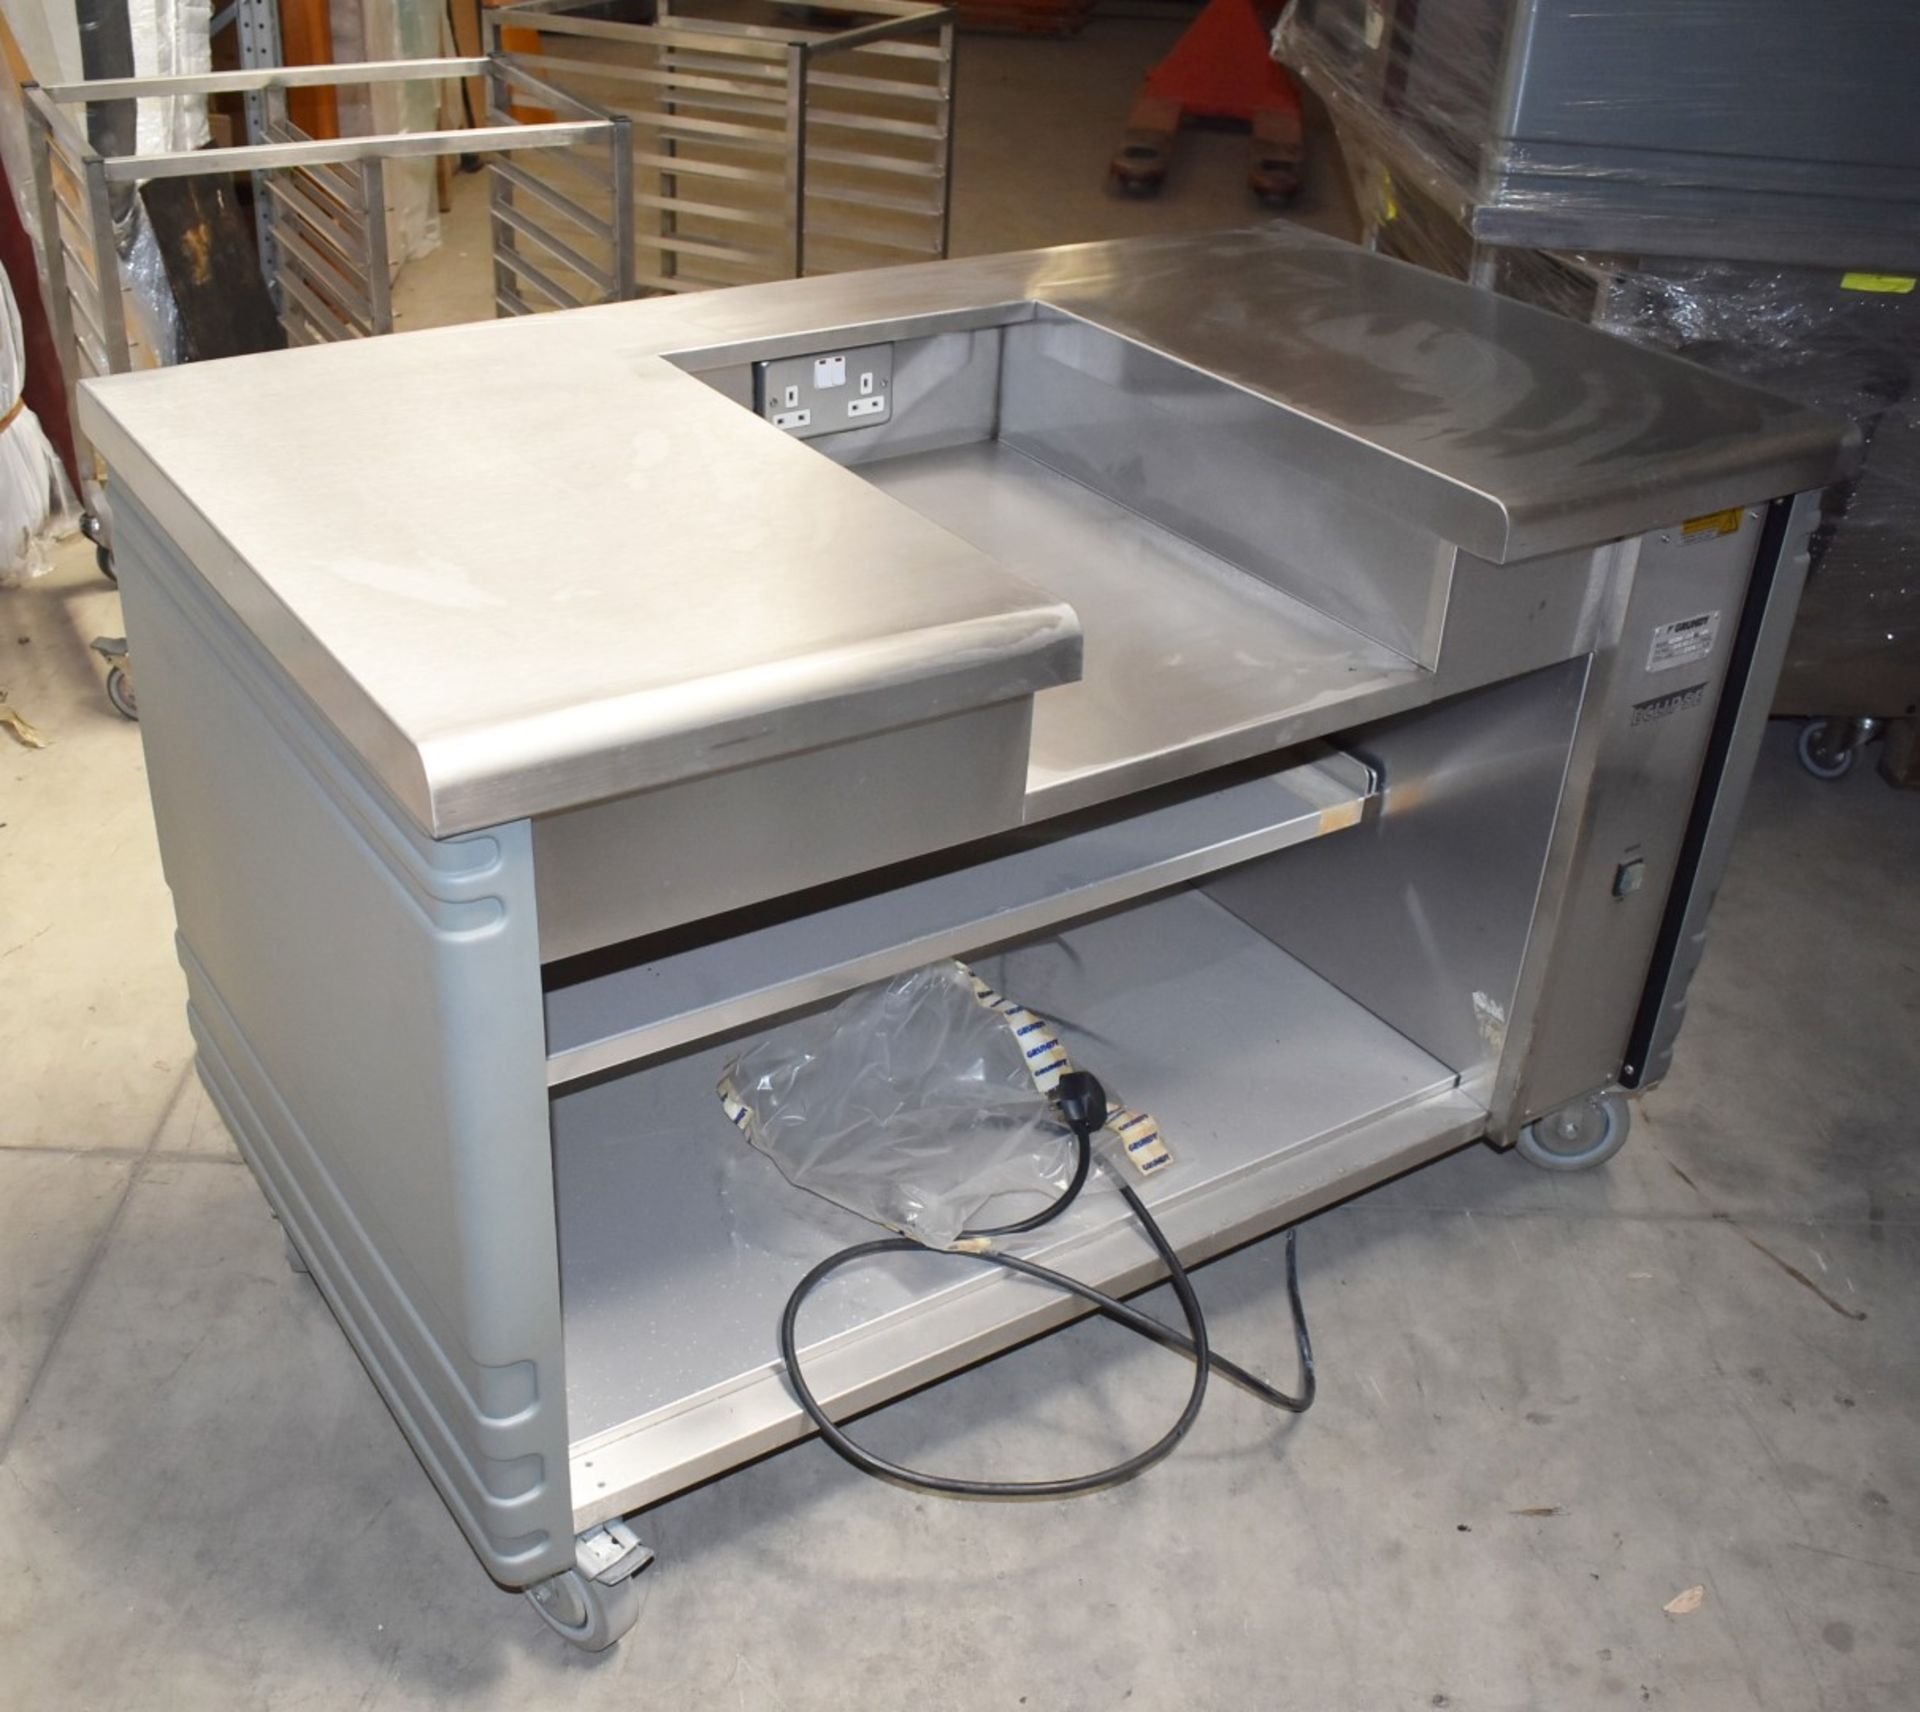 1 x Grundy Commercial Mobile Servery Unit With Stainless Steel Top Featuring Insert For Appliance or - Image 3 of 12